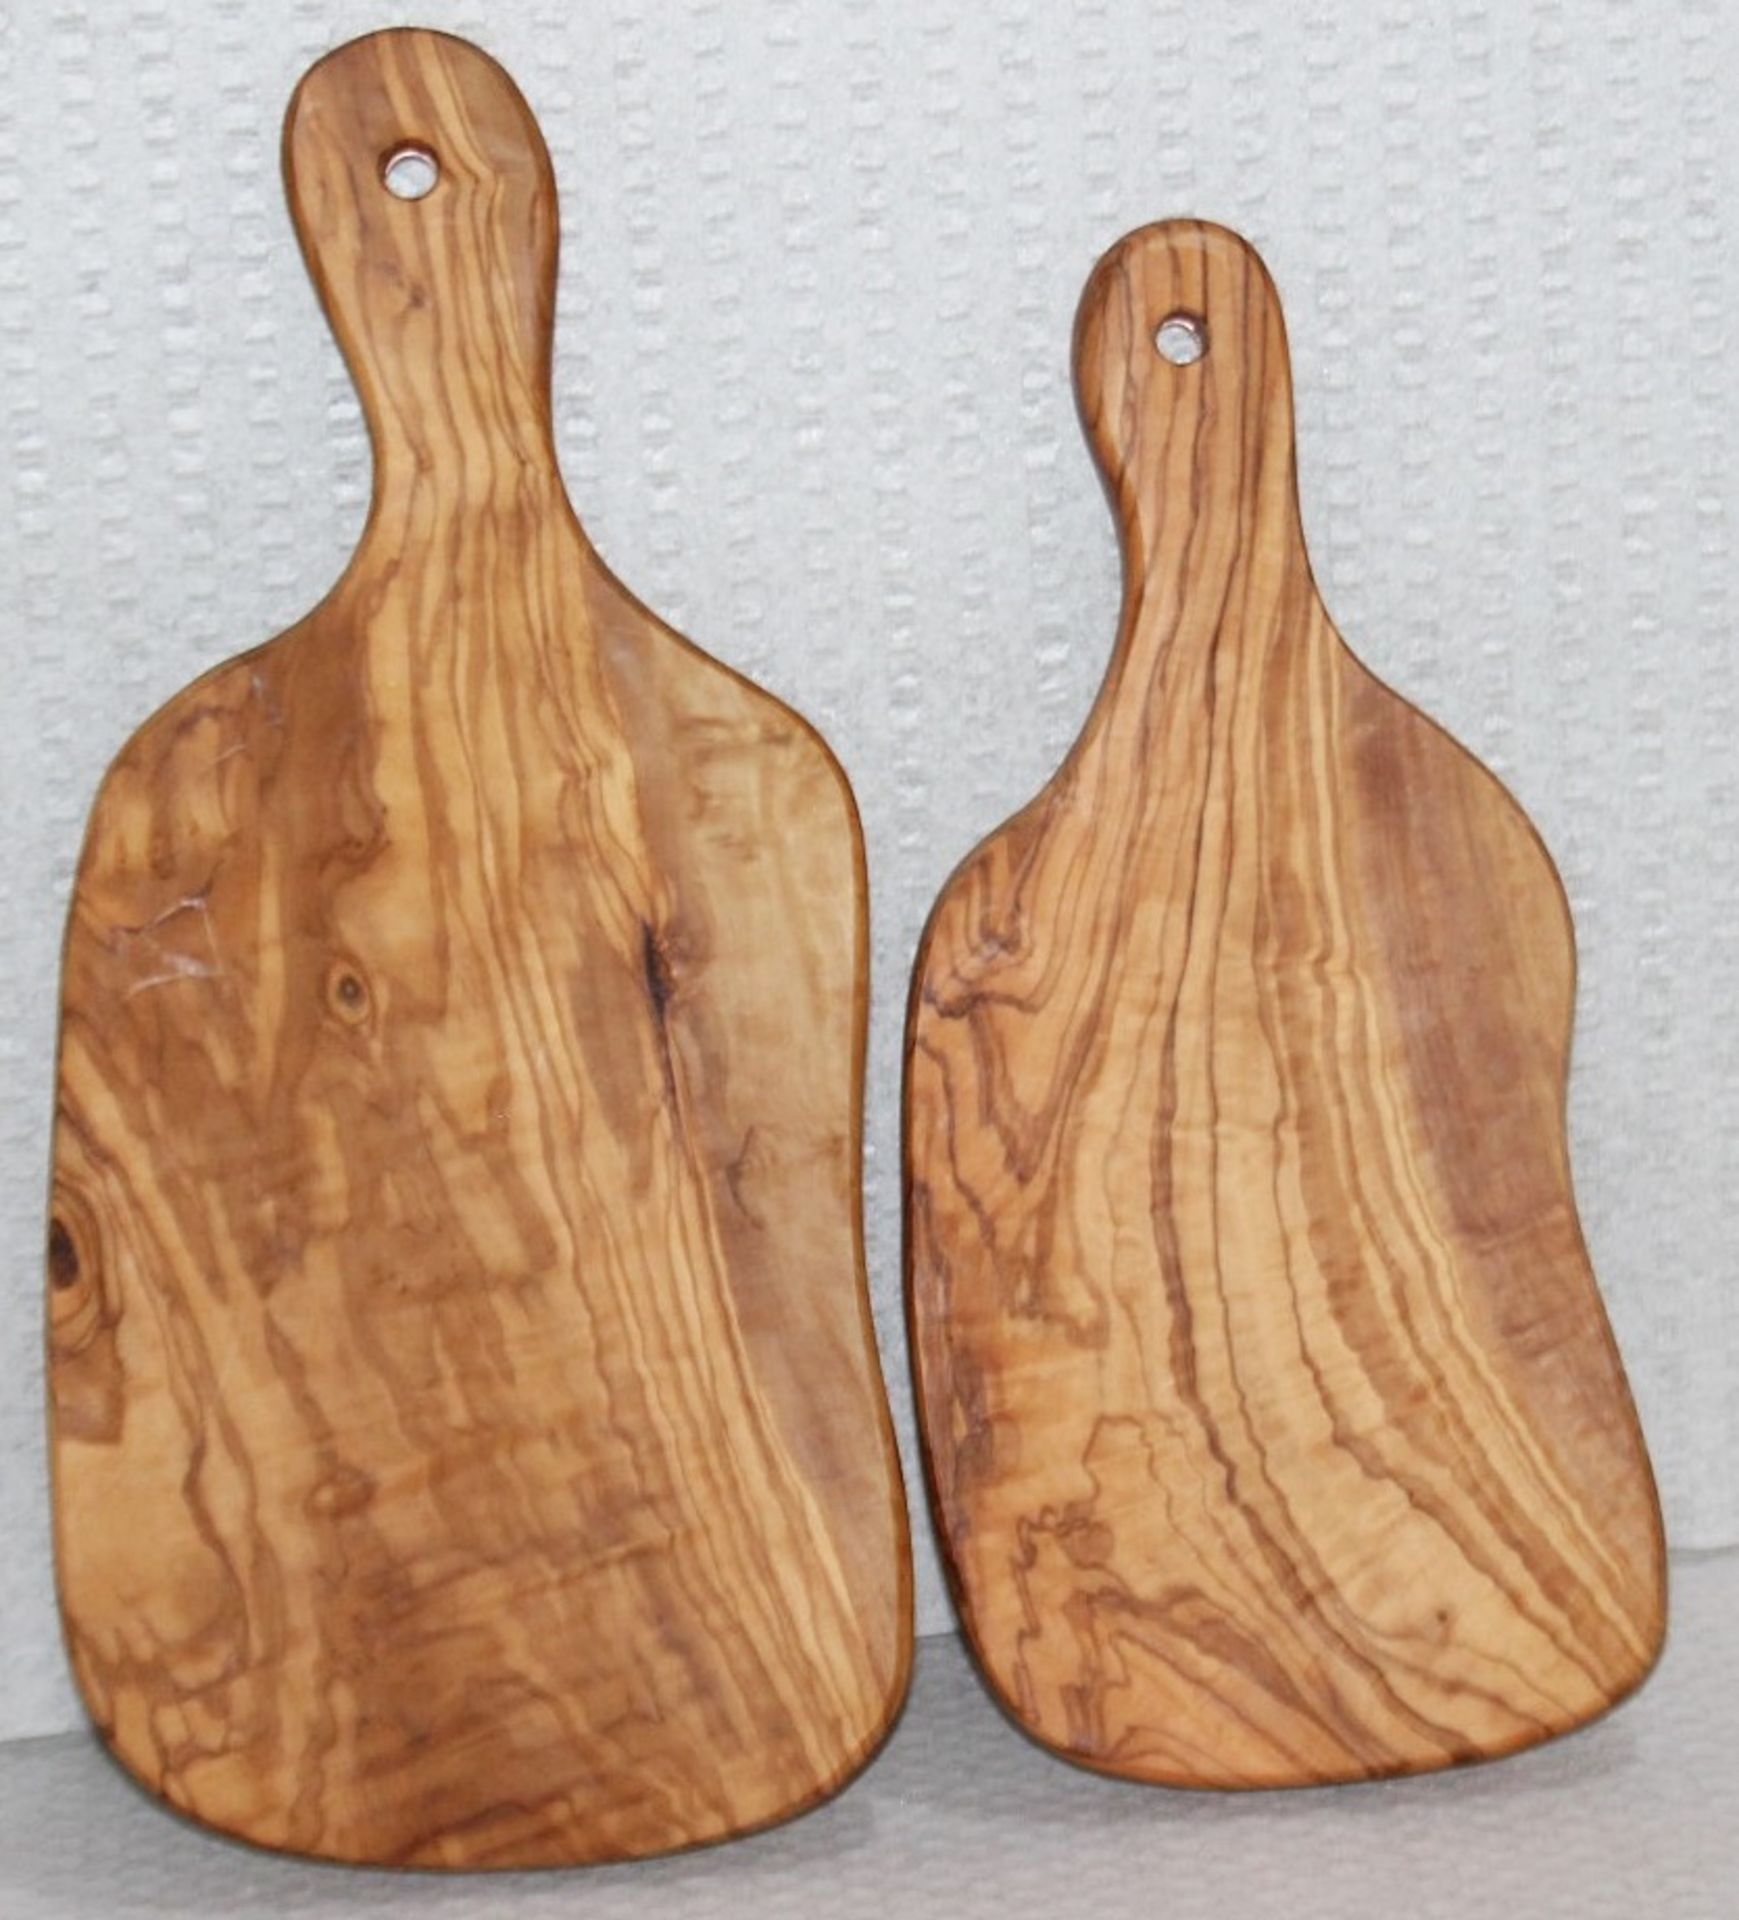 Set of 2 x RUFFONI Luxury Olivewood Chopping Boards - Made In Italy - Original Price £100.00 - Image 2 of 5